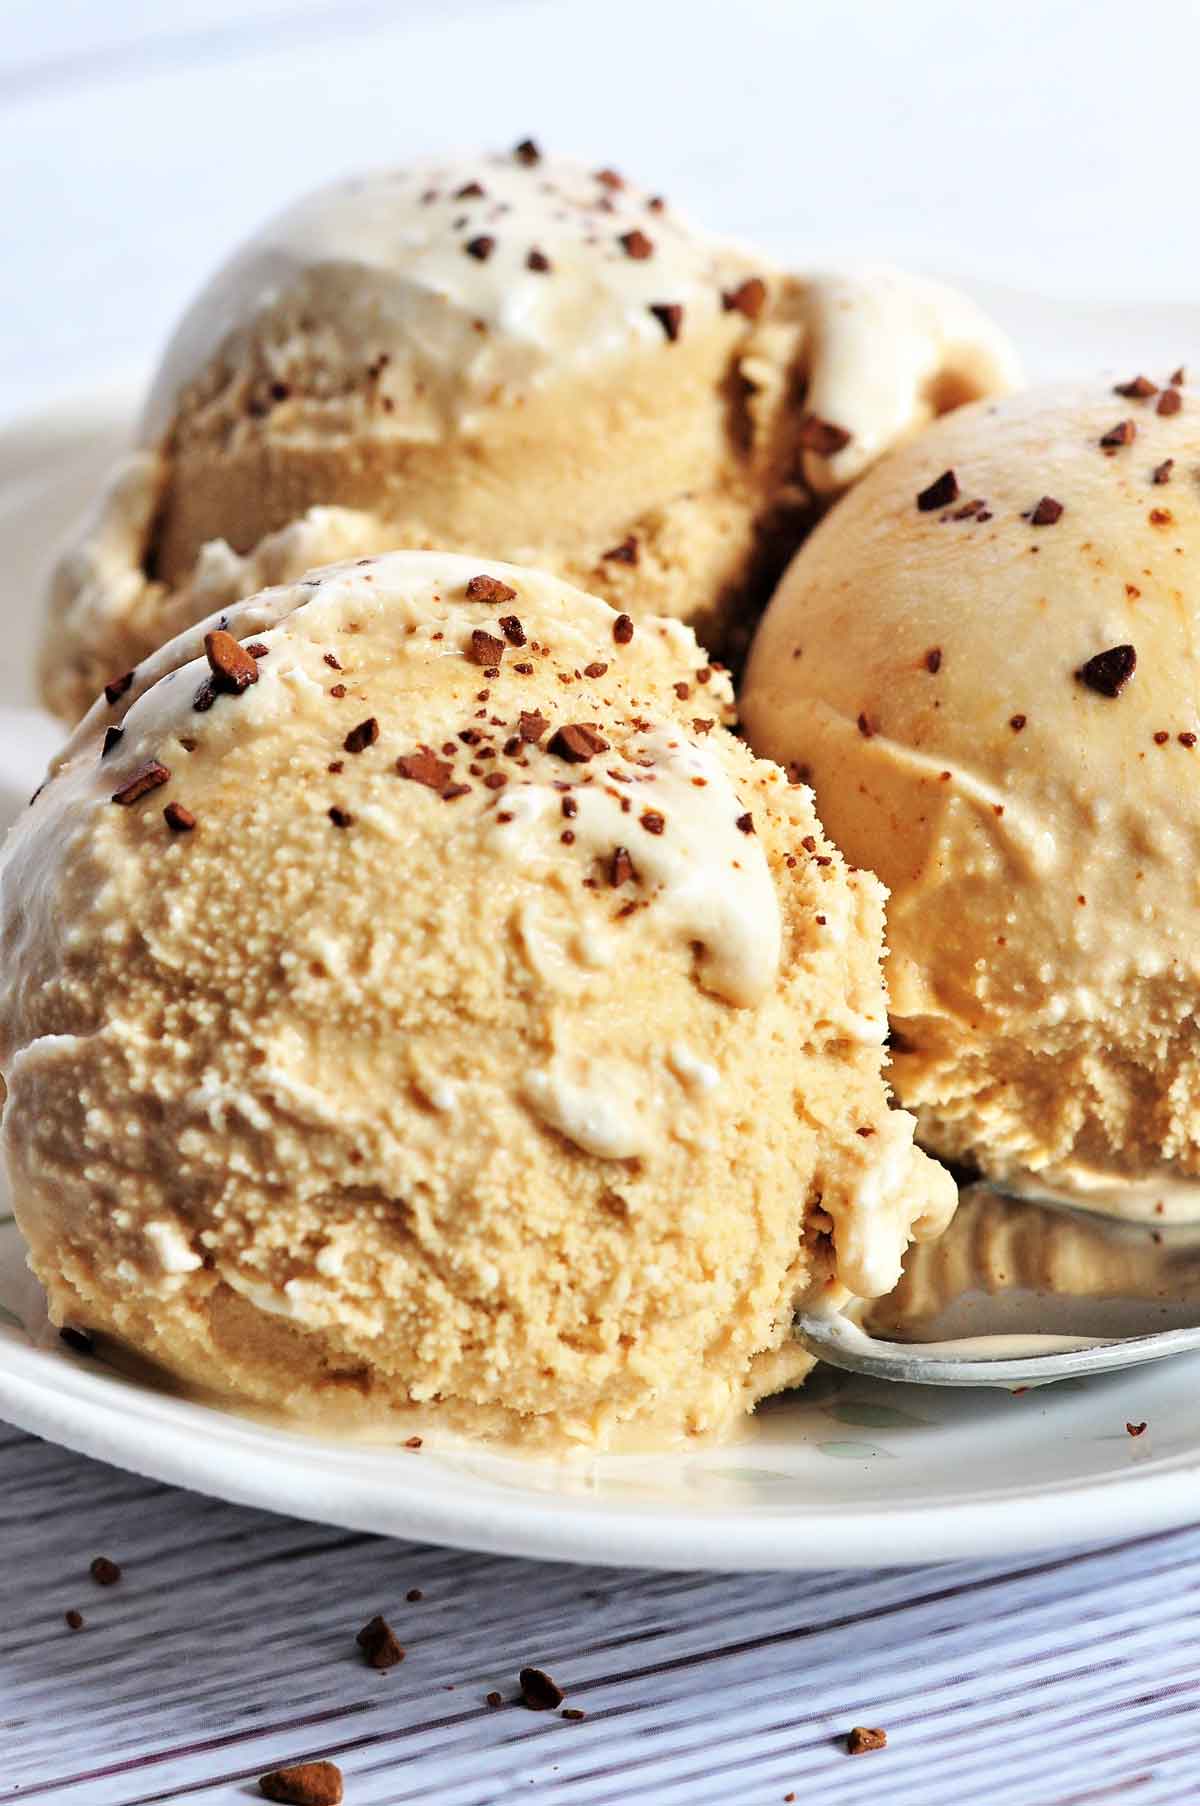 Three scoops of coffee ice cream in a plate.